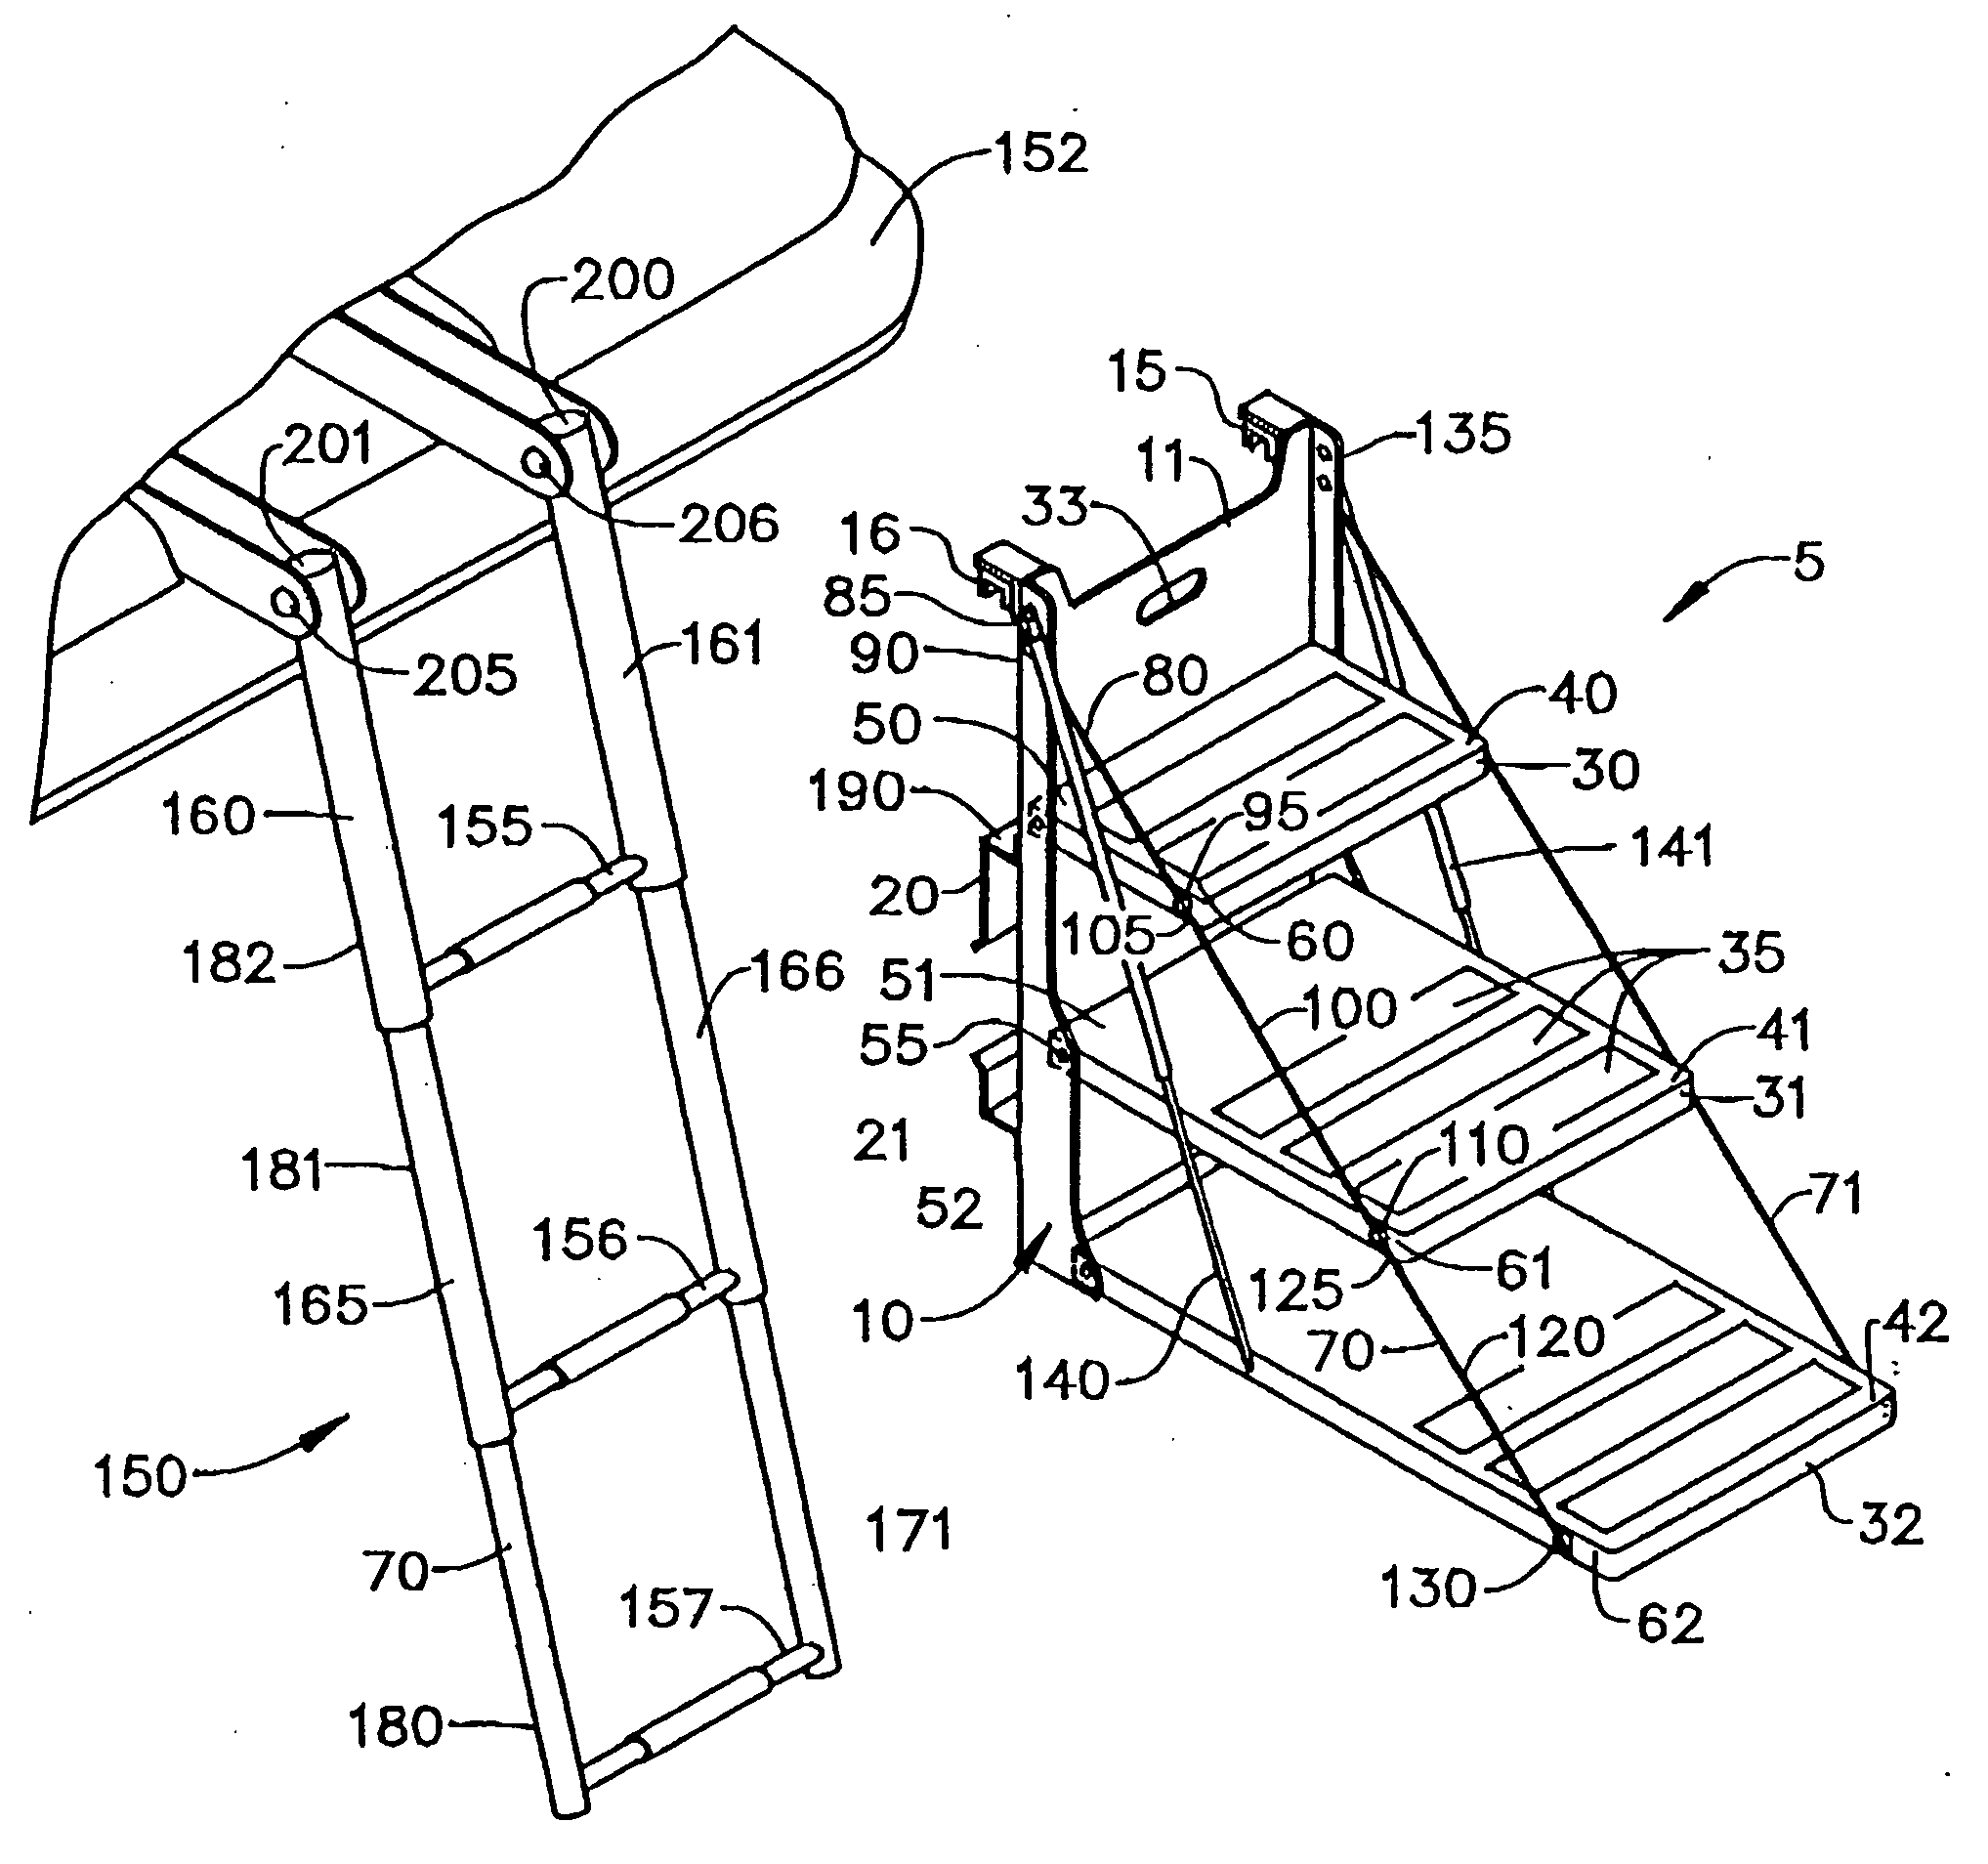 Detachable stairway system for water vehicles and method of use